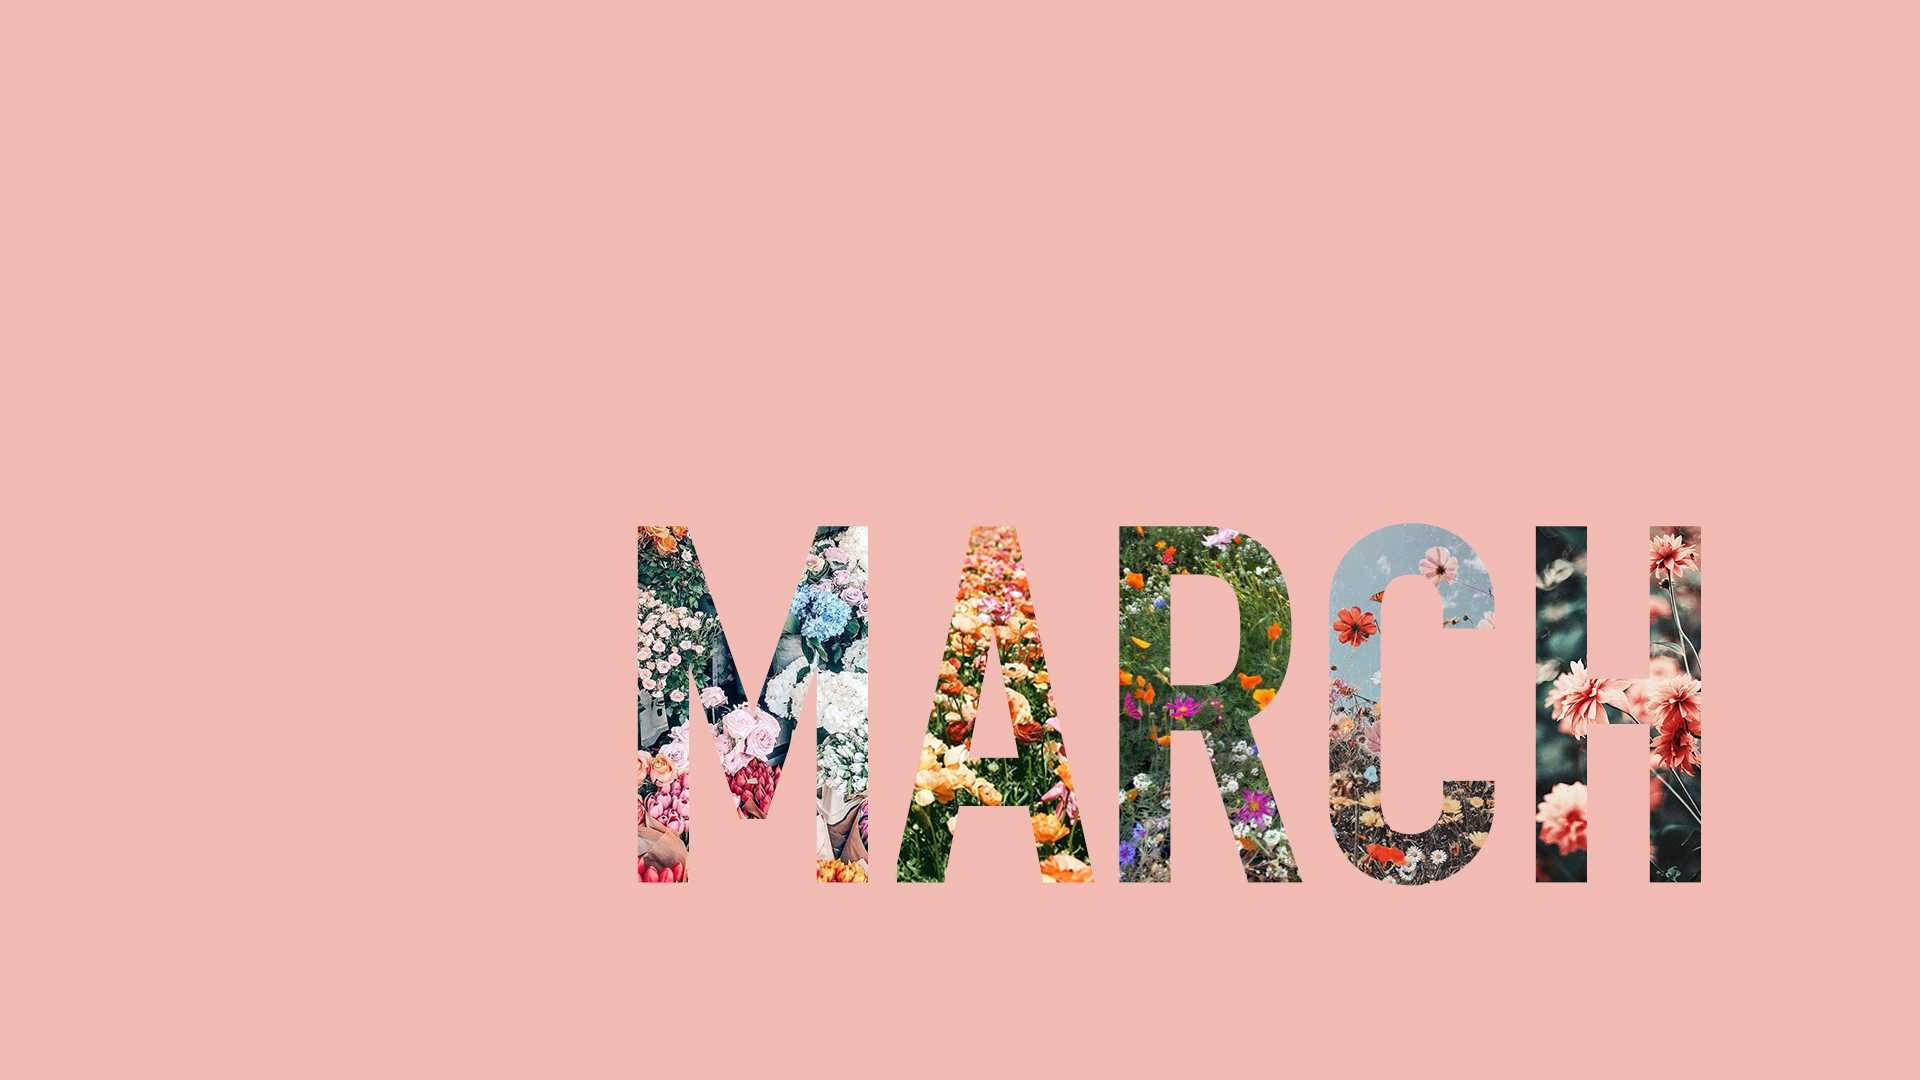 Free March Wallpaper Downloads, March Wallpaper for FREE